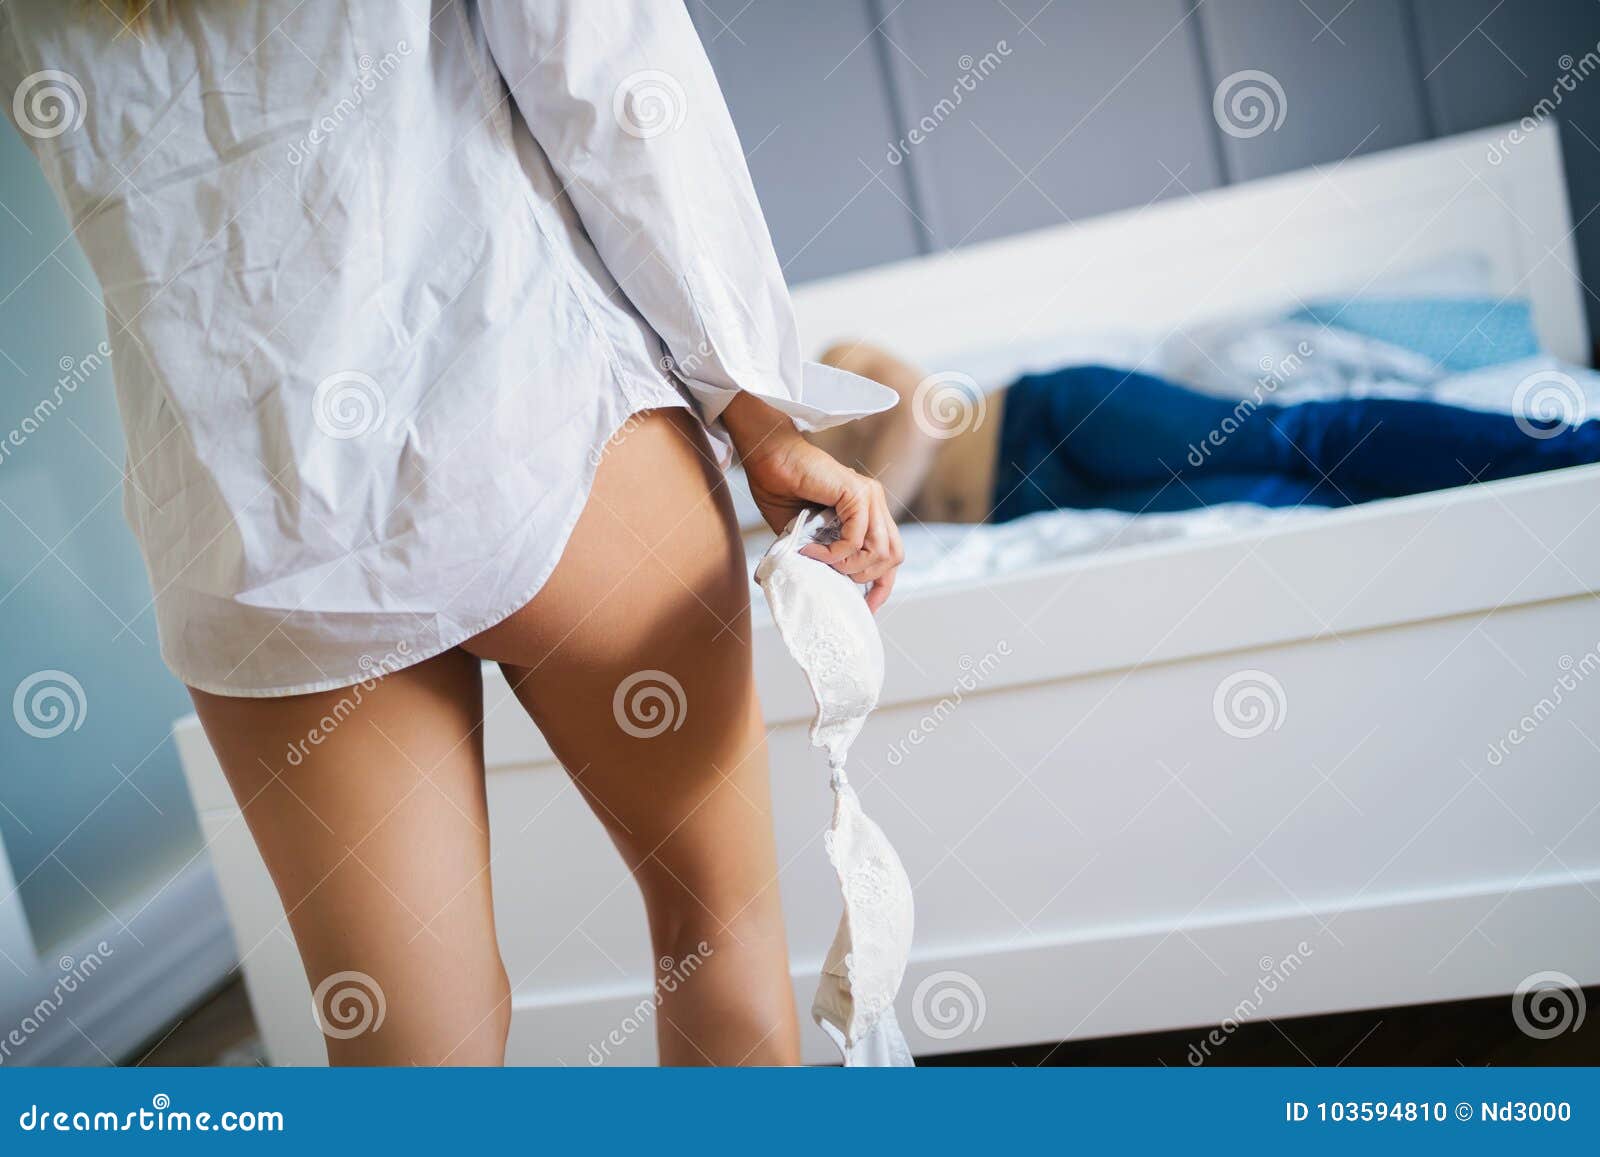 Woman Getting Ready for Sex in Bedroom Stock Photo